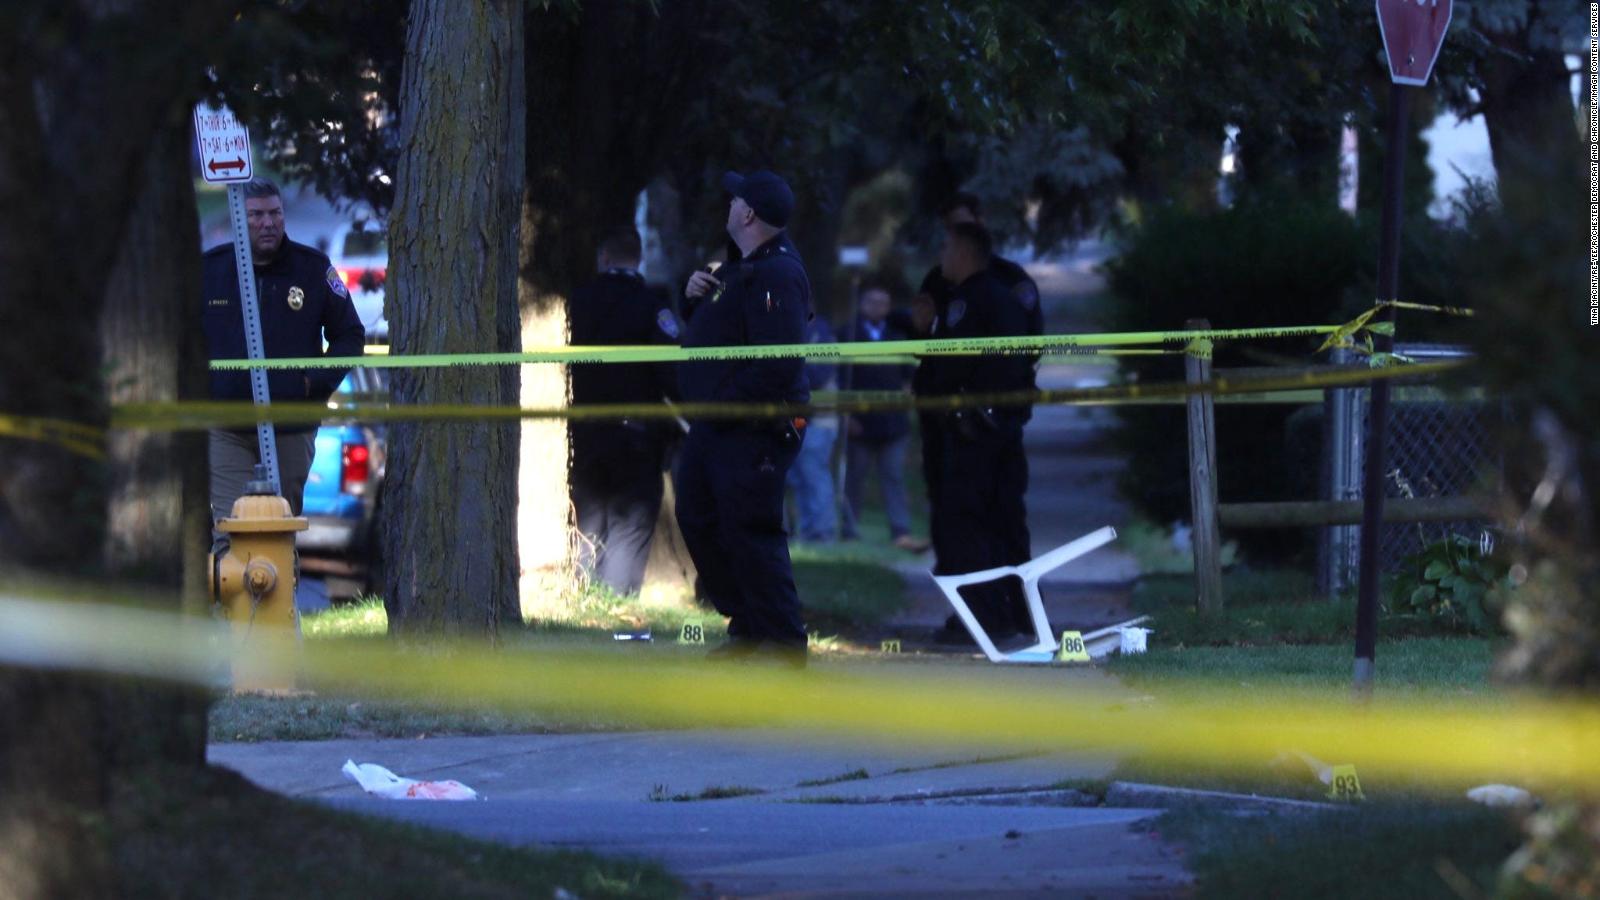 Rochester shooting Two people were killed and 14 wounded during